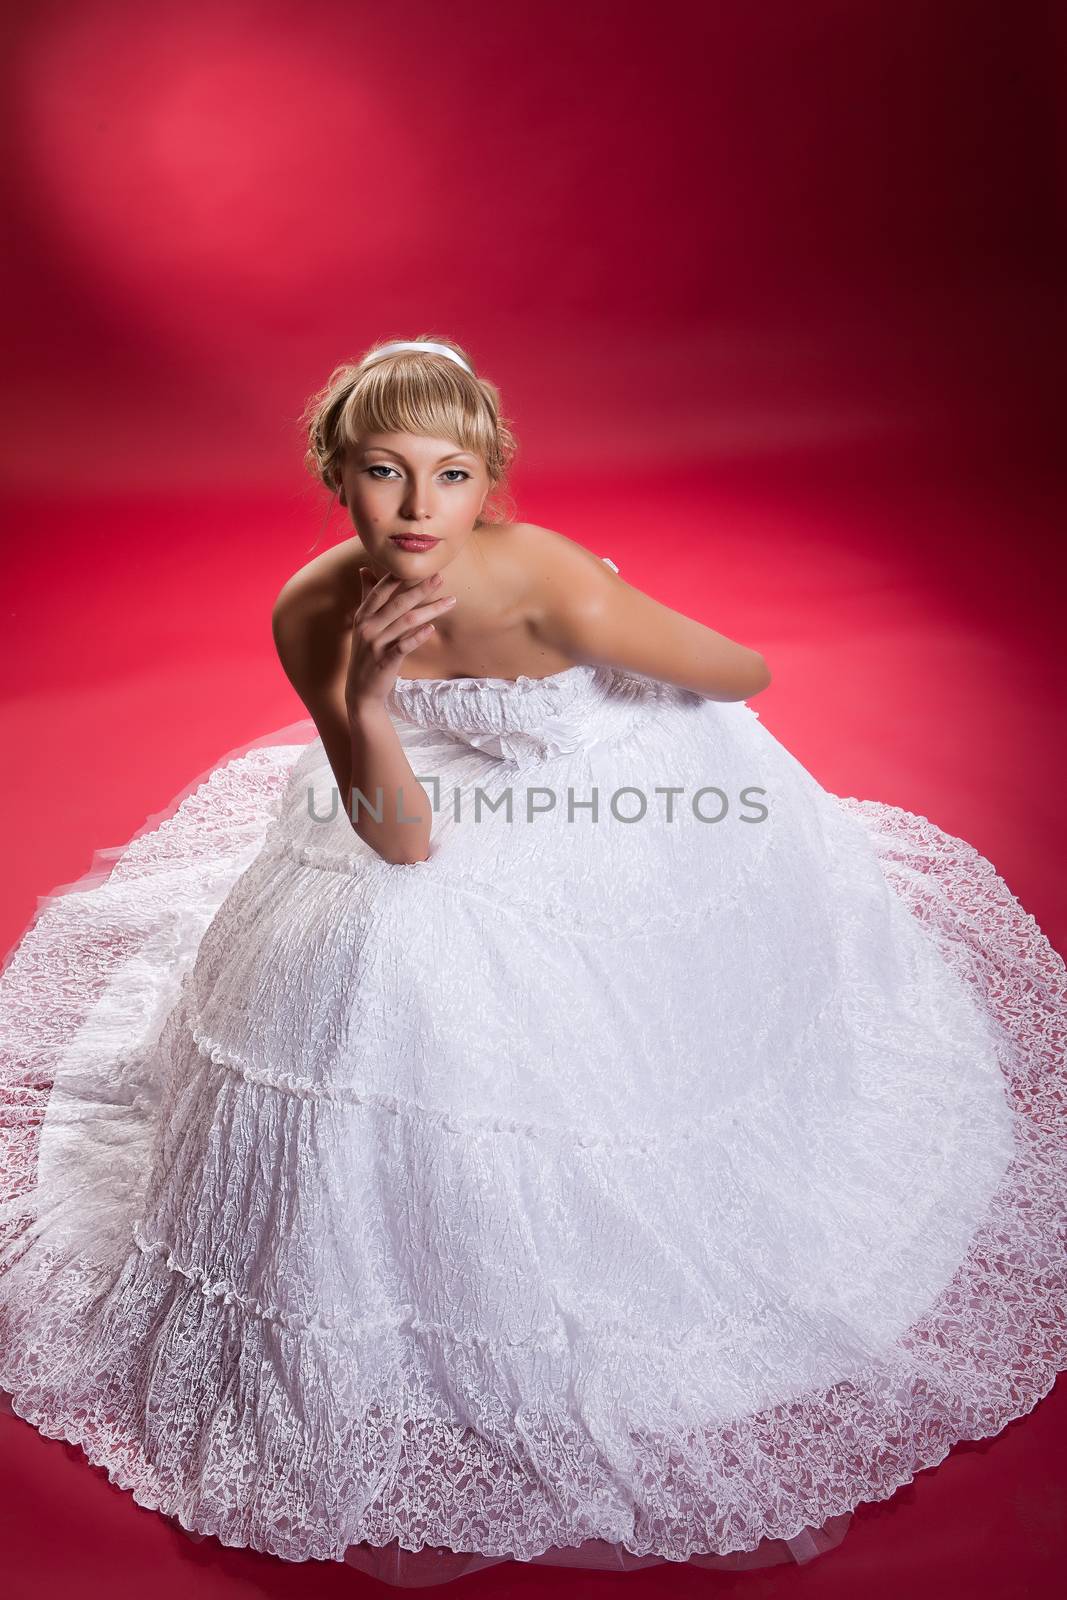 Young woman in a wedding dress on a studio background